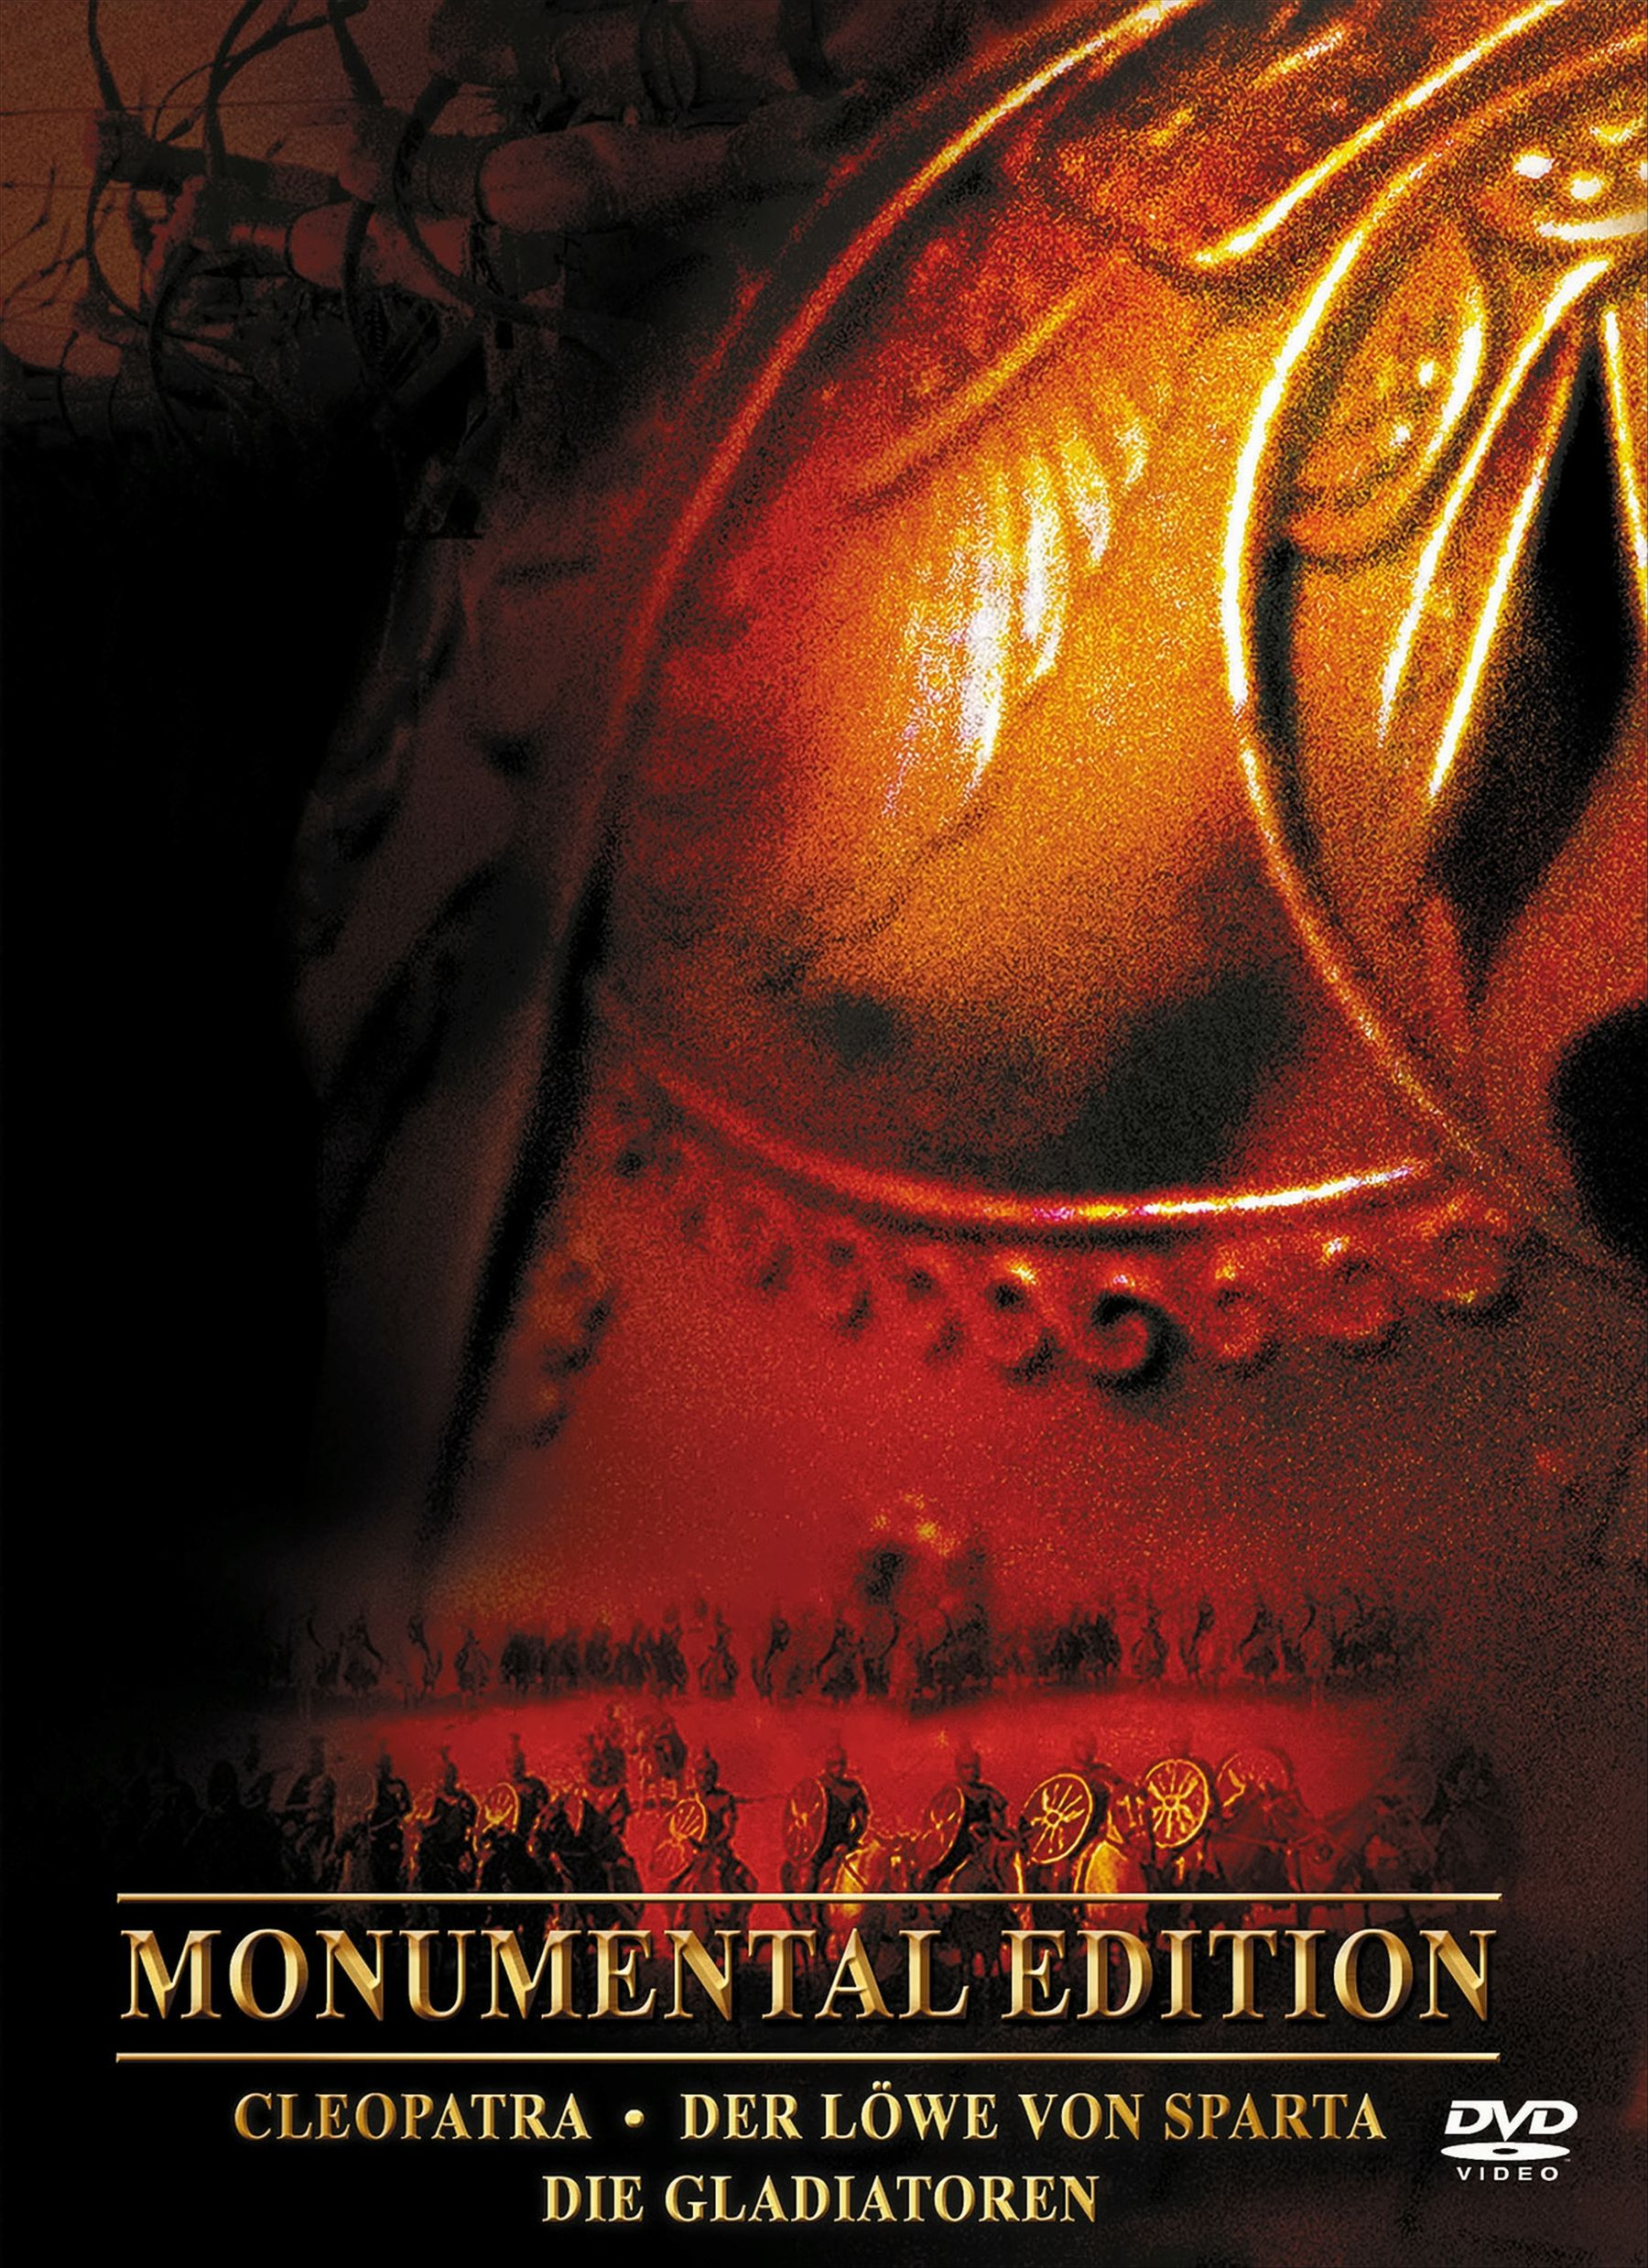 Monumental Edition DVDs) (4 DVD